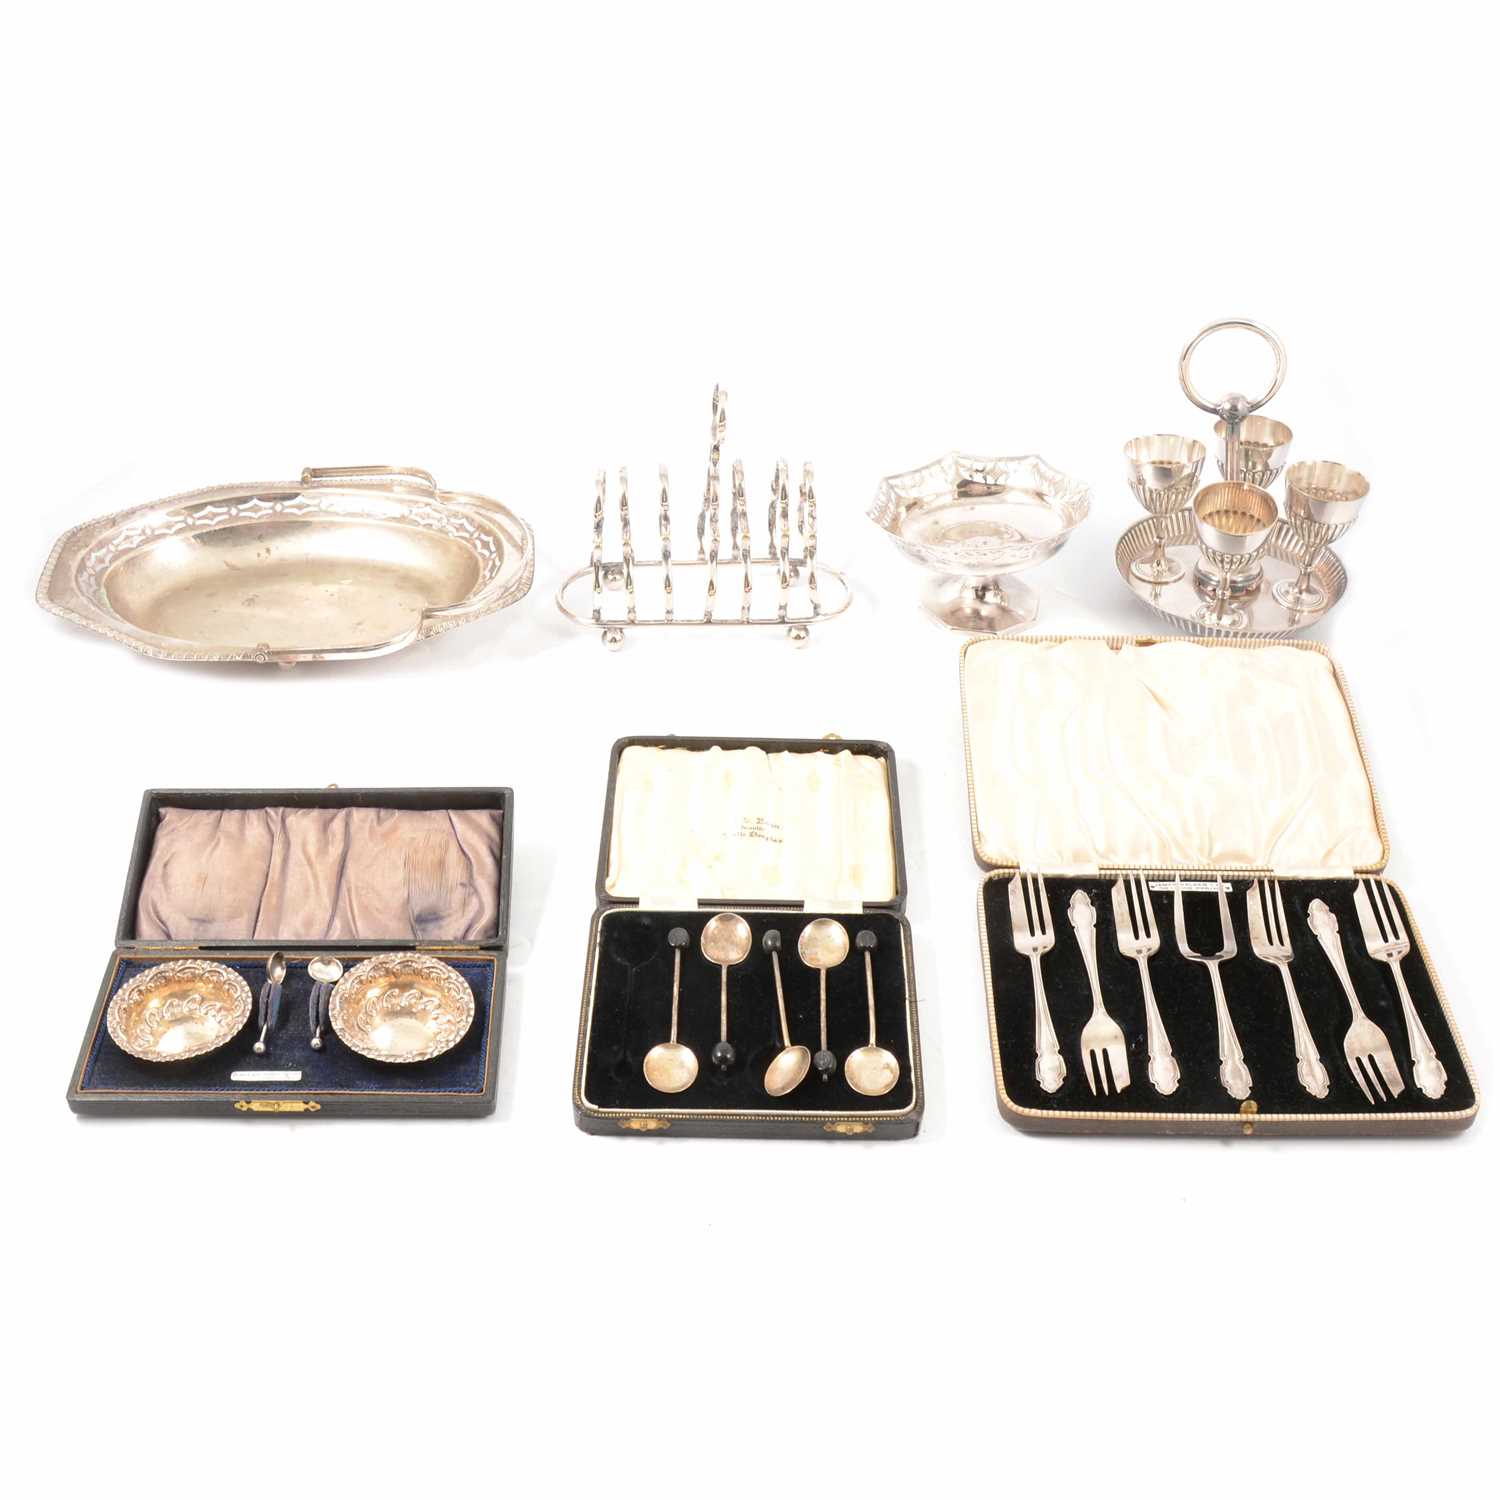 Lot 116 - Pair of small silver salts and spoons, cased, other silver and silver plate